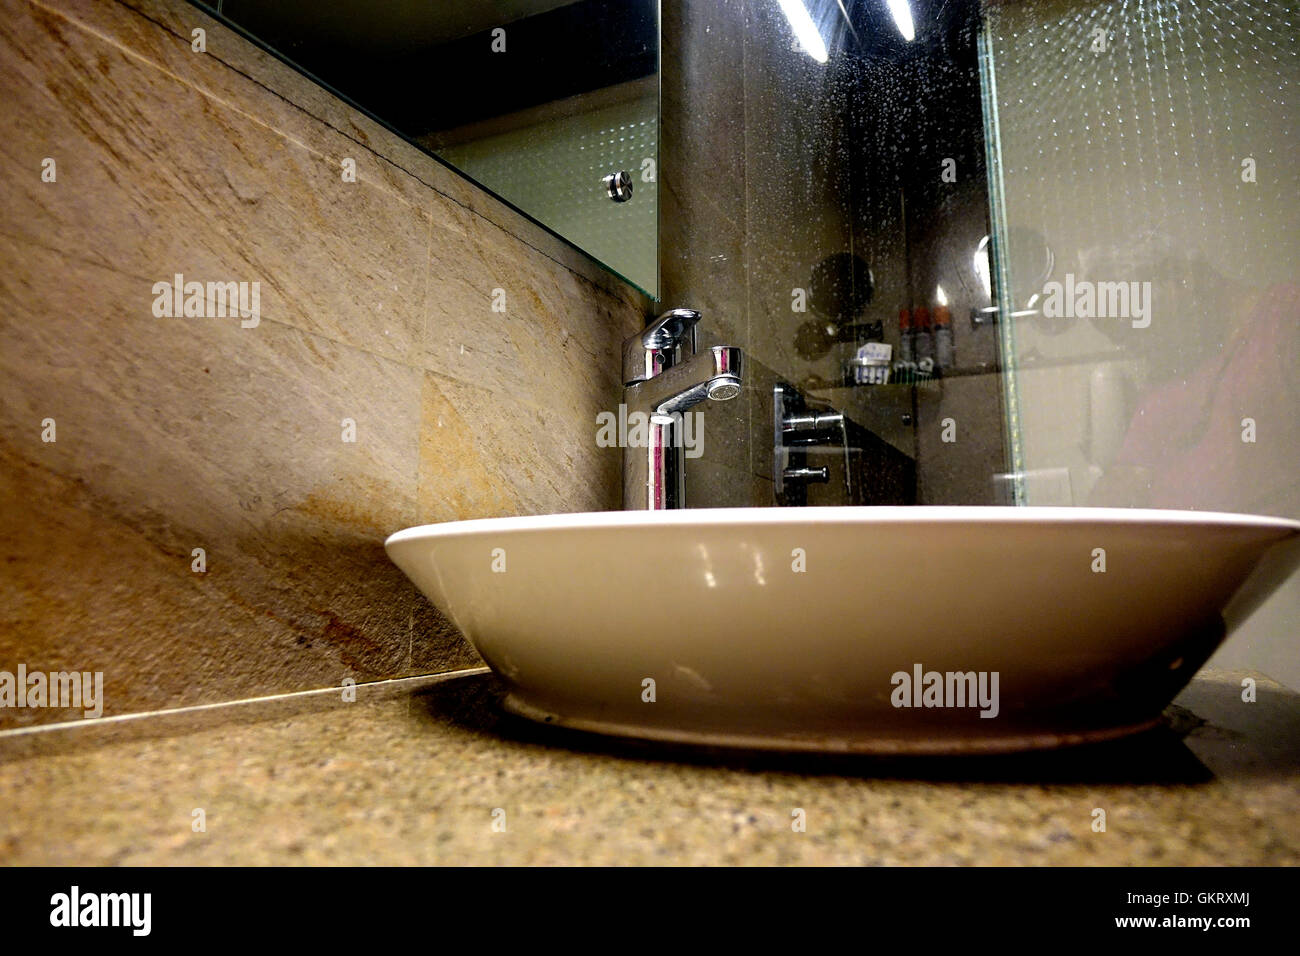 View of a Hotel Bath (wash basin in view). Stock Photo